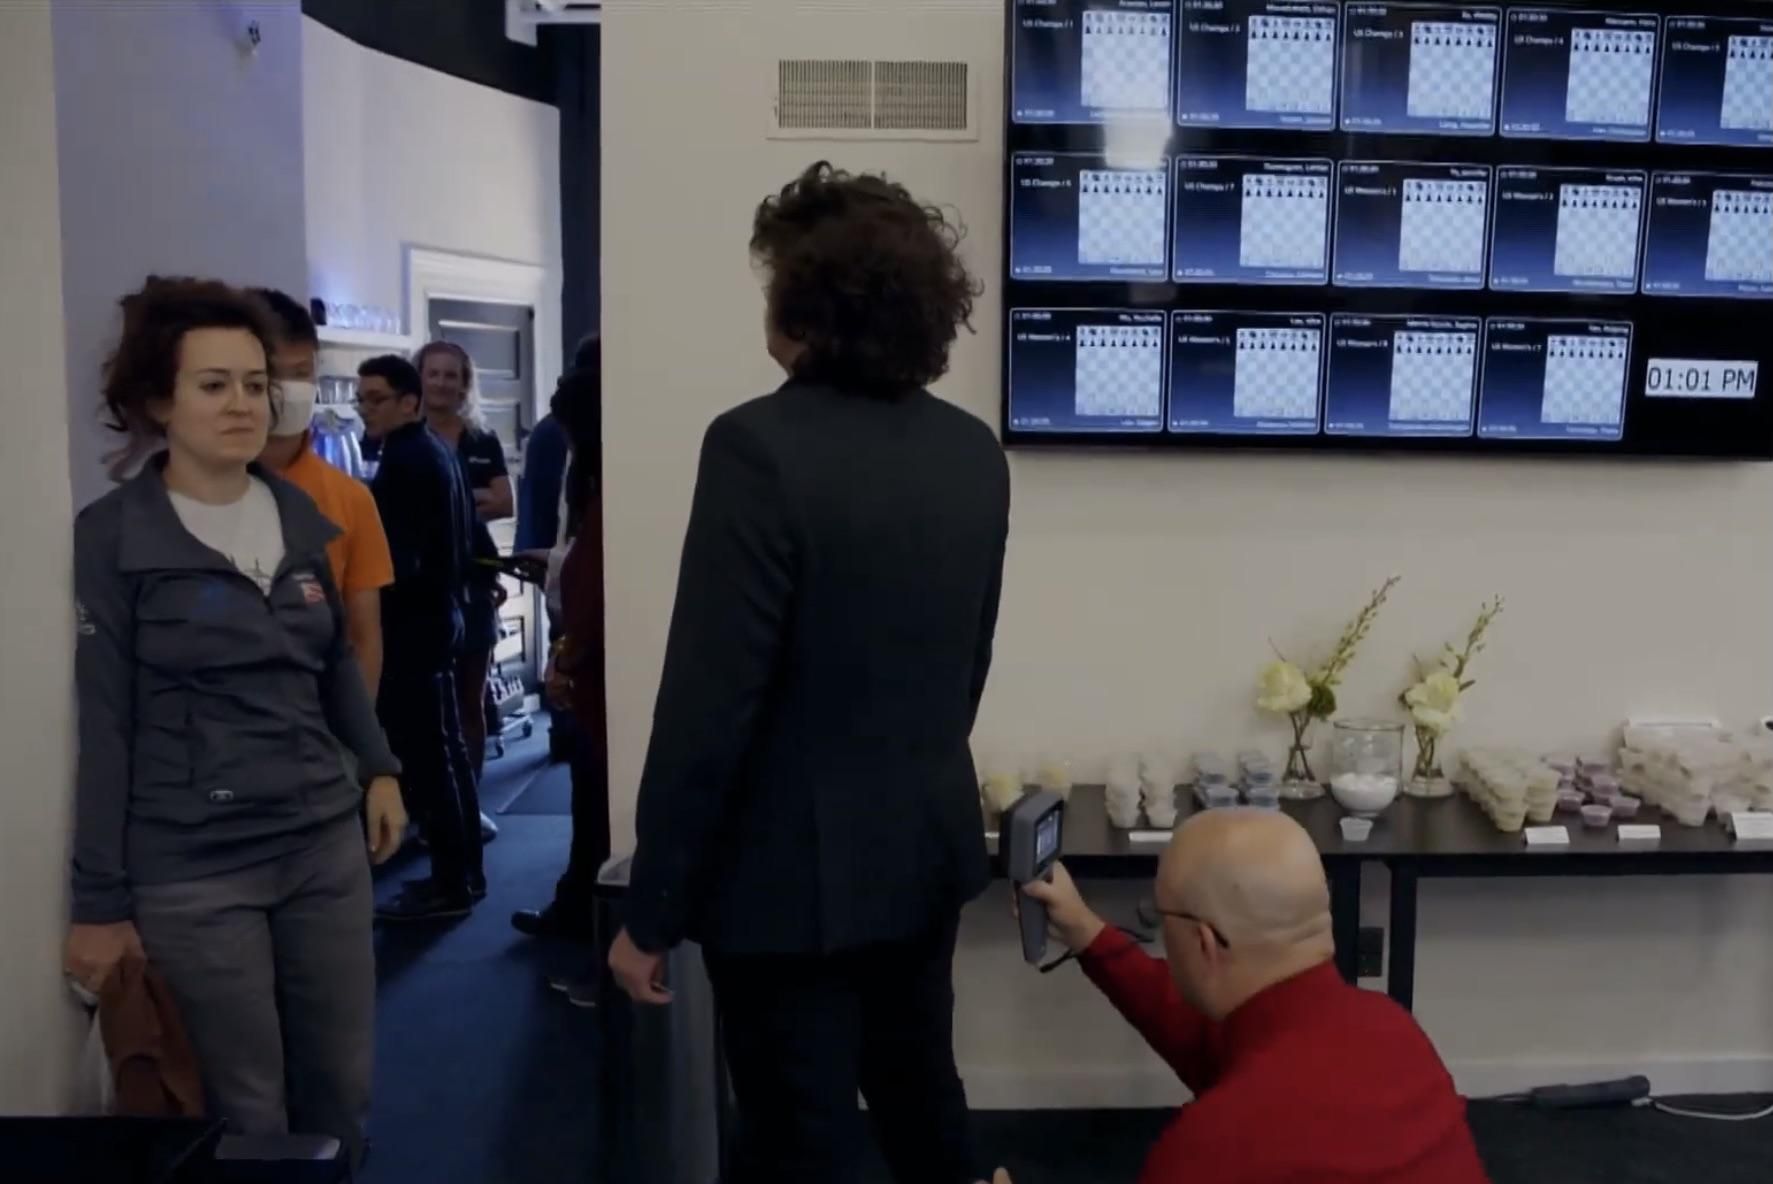 Hans Niemann going through chess security at the US open today.